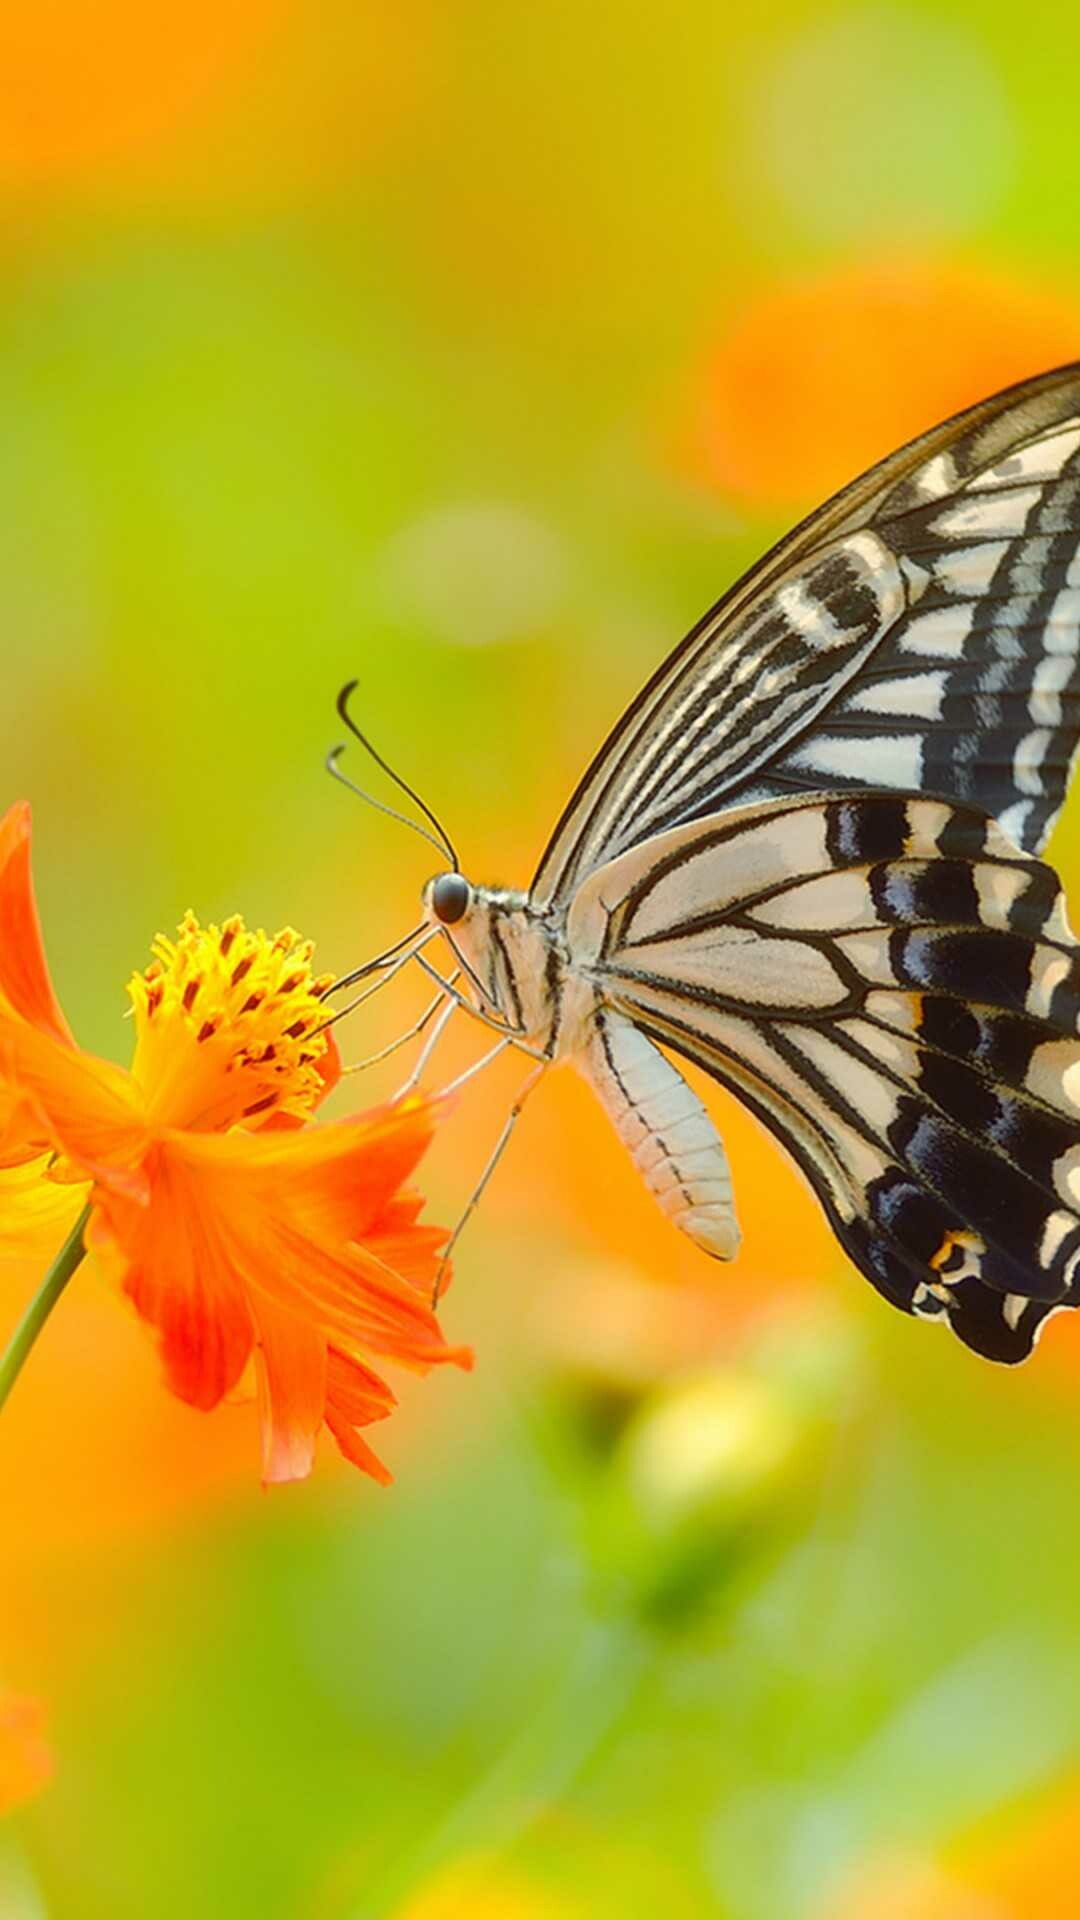 Butterfly wallpaper, Aesthetic appeal, Vivid portrayal, Natural beauty, 1080x1920 Full HD Phone